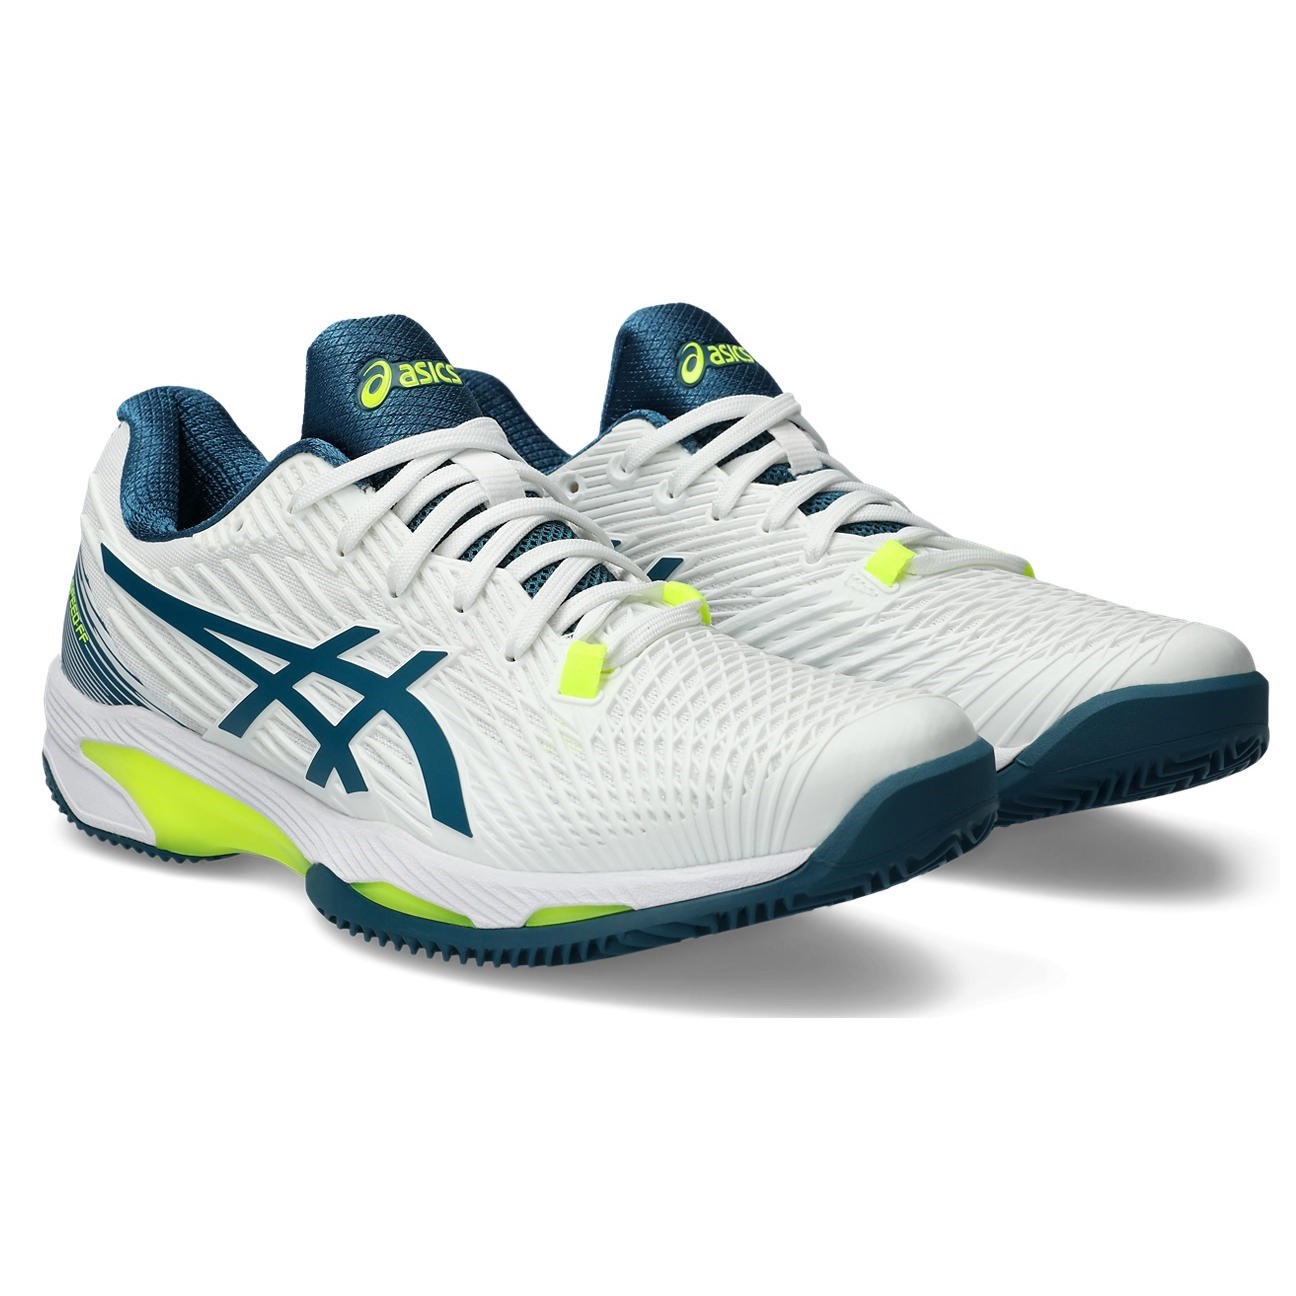 Asics Gel Solution Speed FF 2 Clay - Mens Tennis Shoes - White/Restful ...